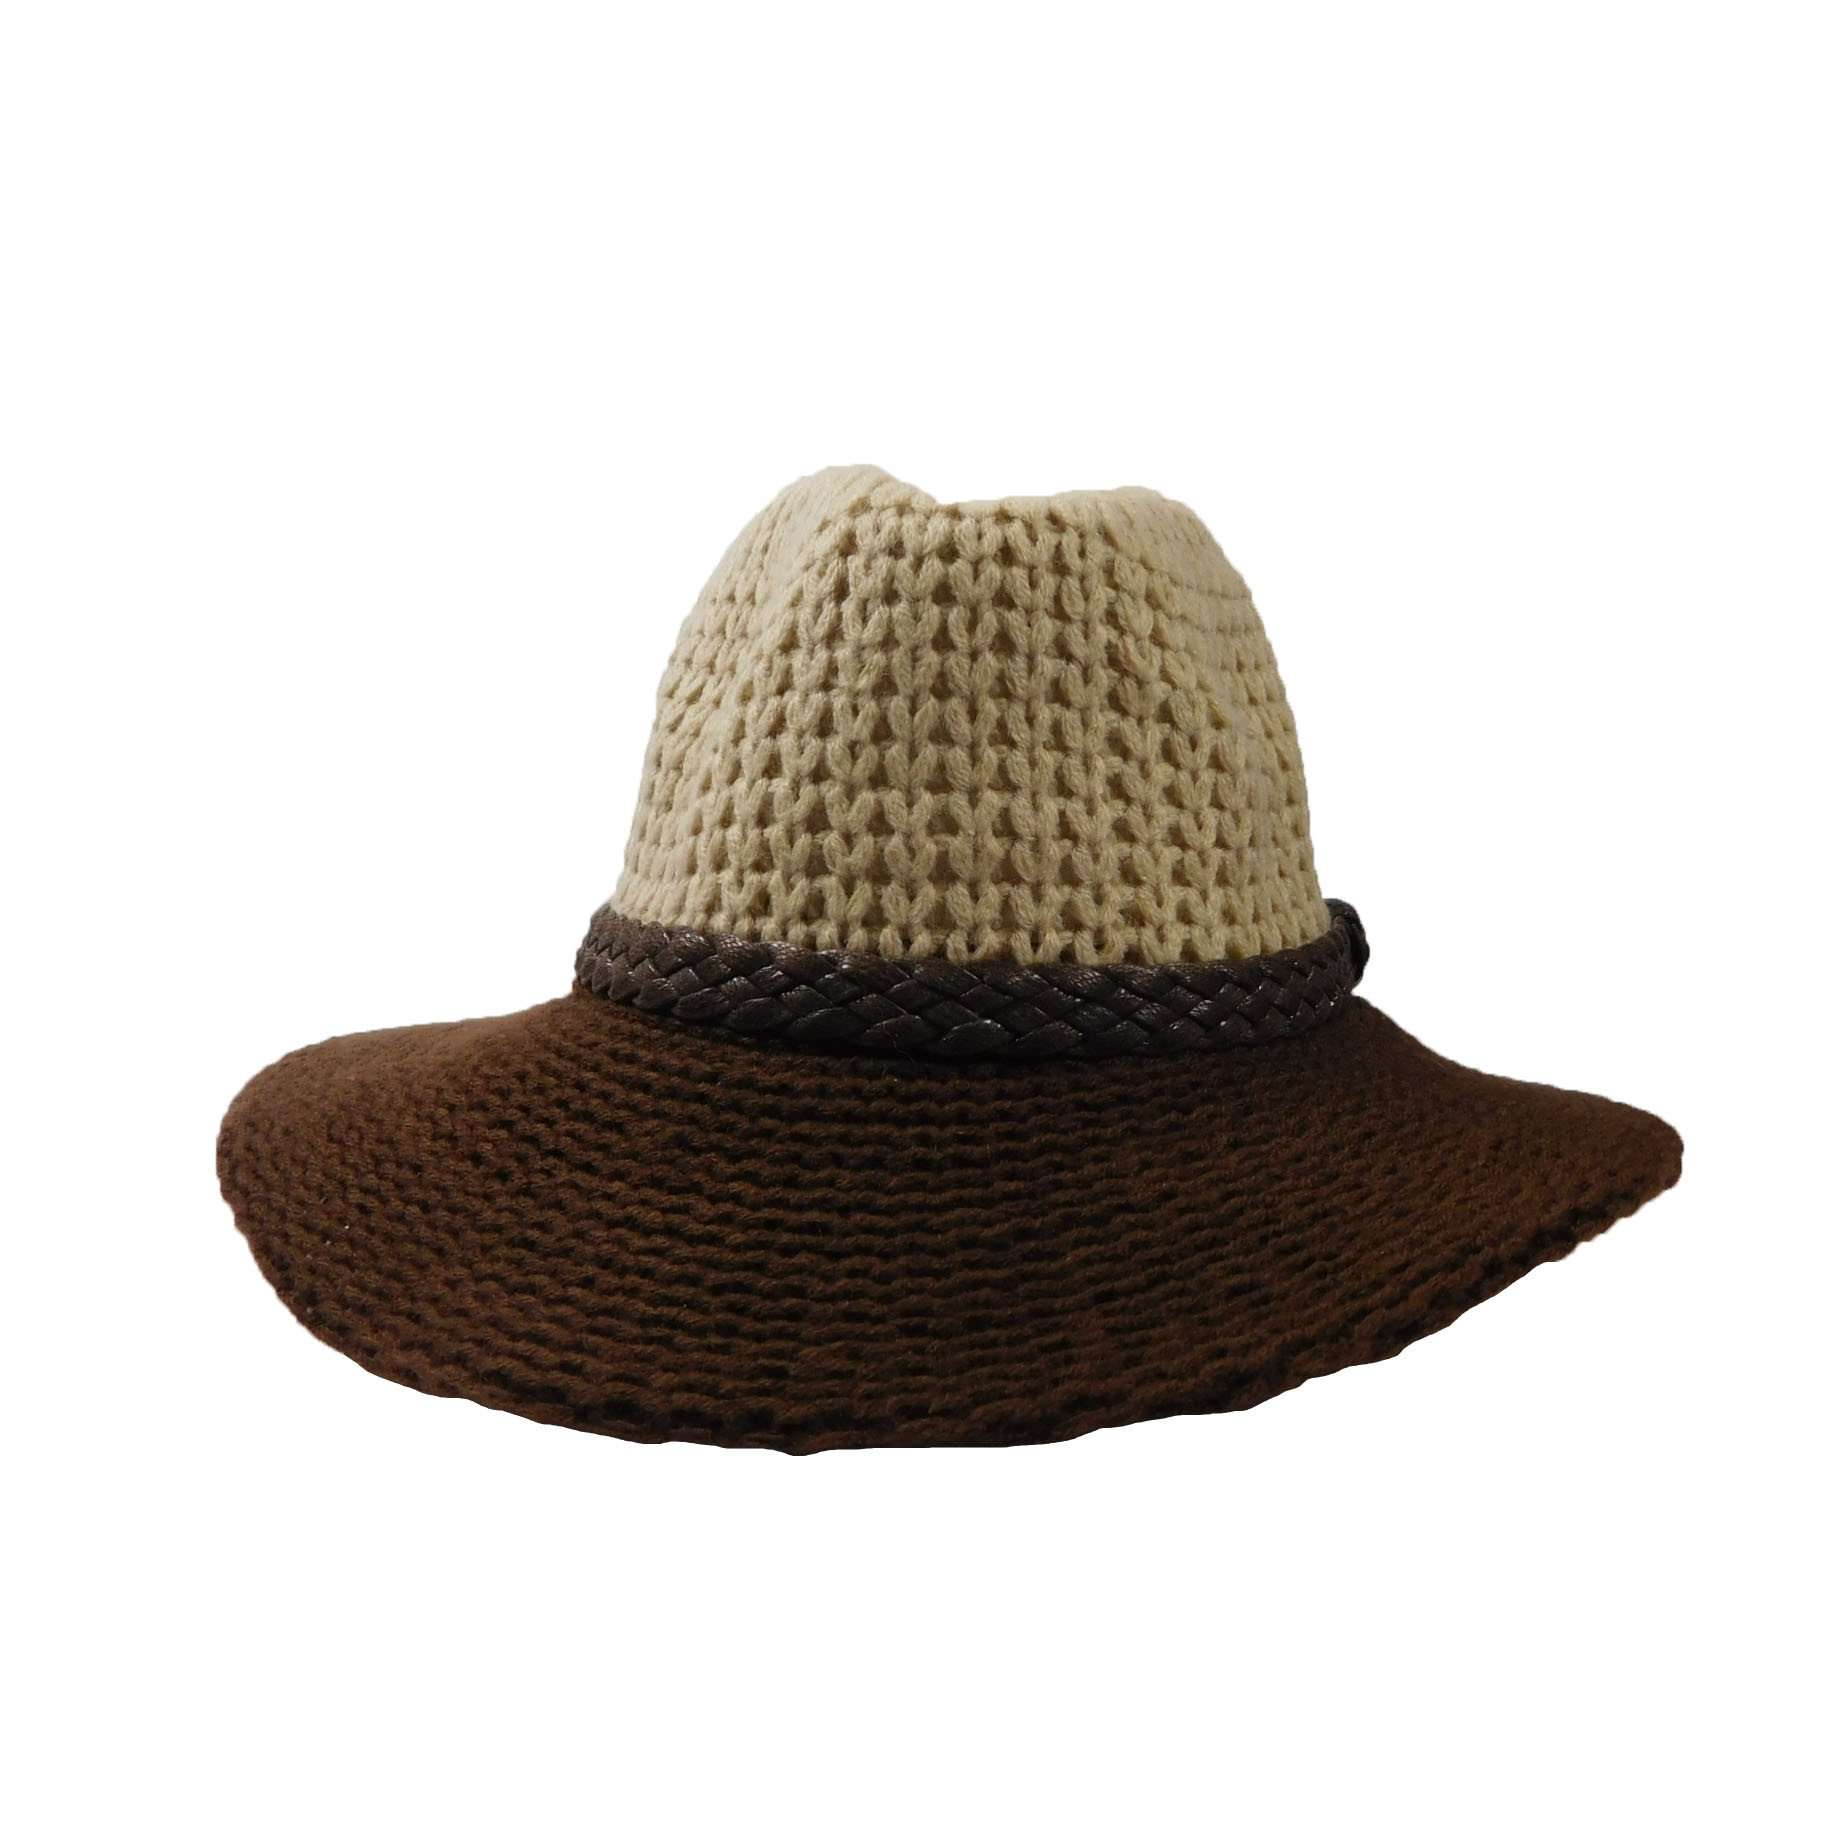 Knit Fedora Hat with Leather Band Fedora Hat Jeanne Simmons WWAK166BG Beige  